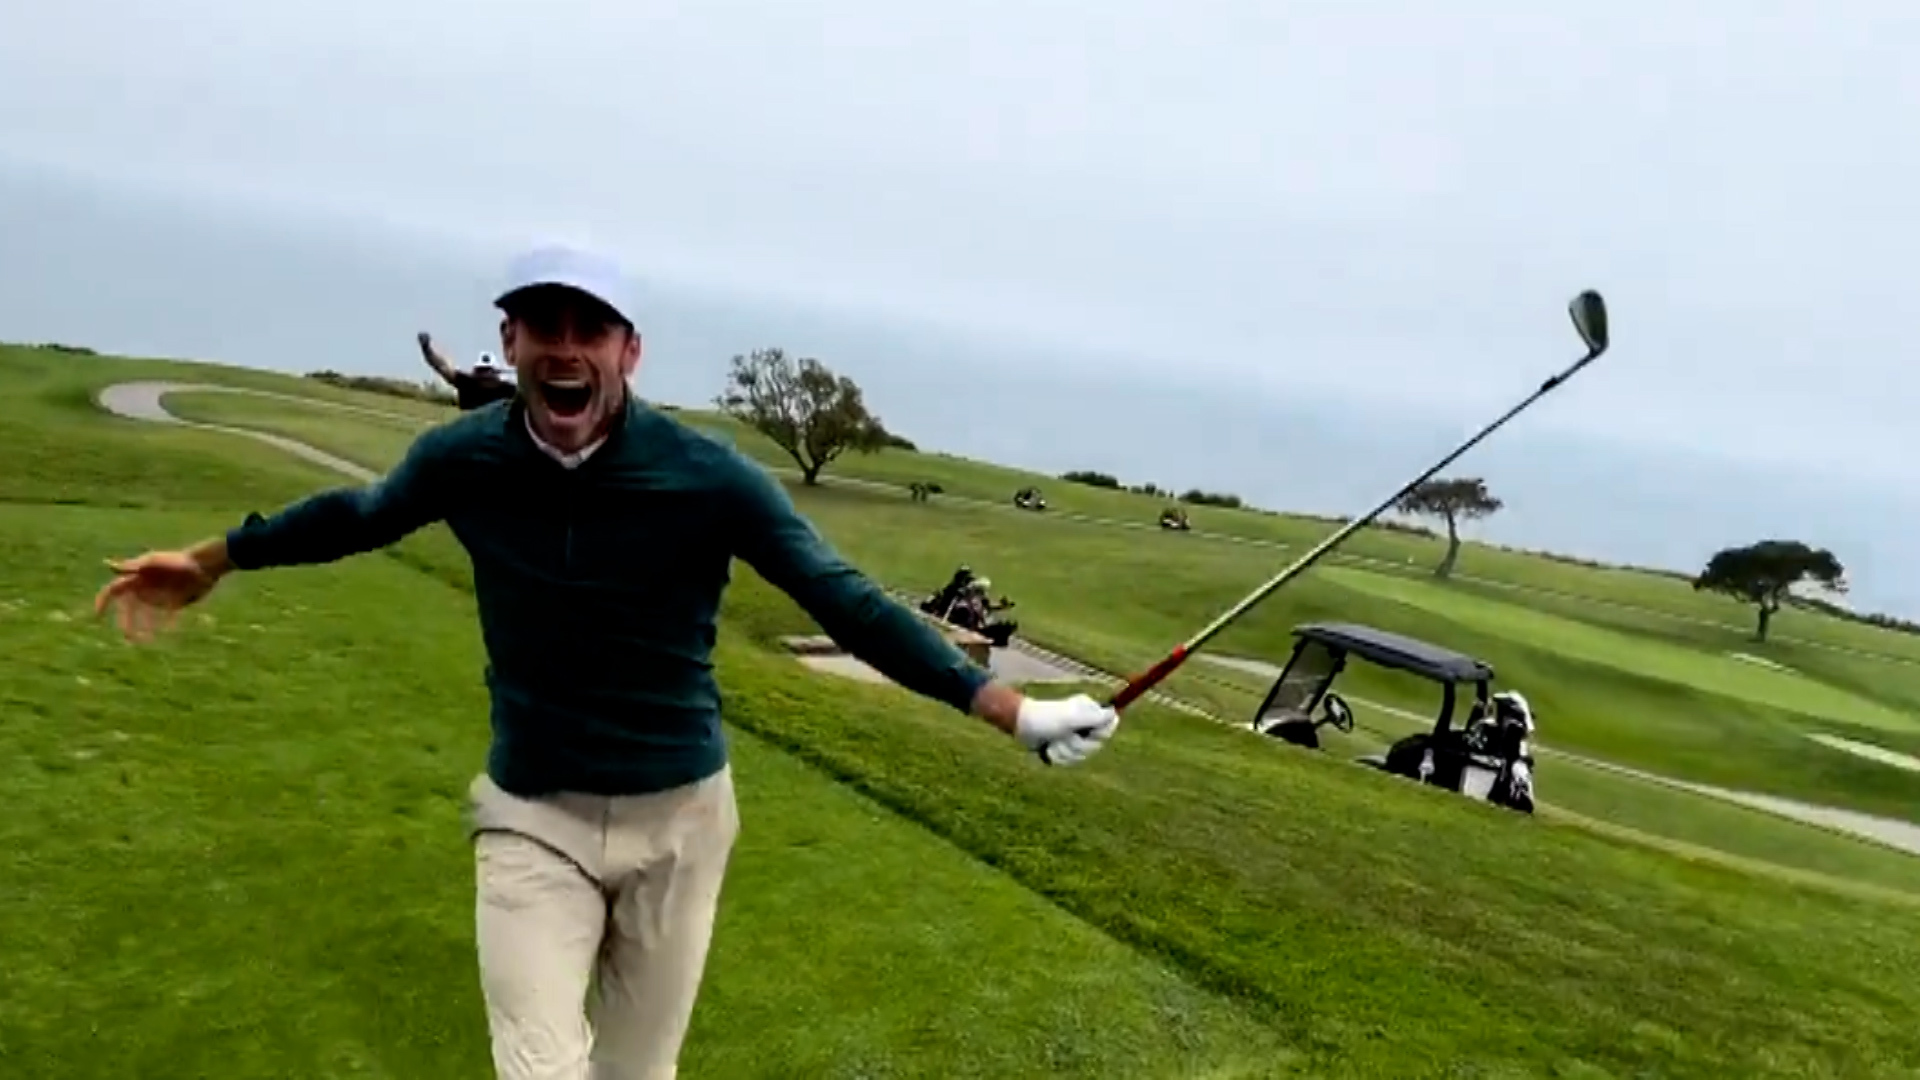 Bale hits first ever hole-in-one with epic shot after Real Madrid's Champions League hammering